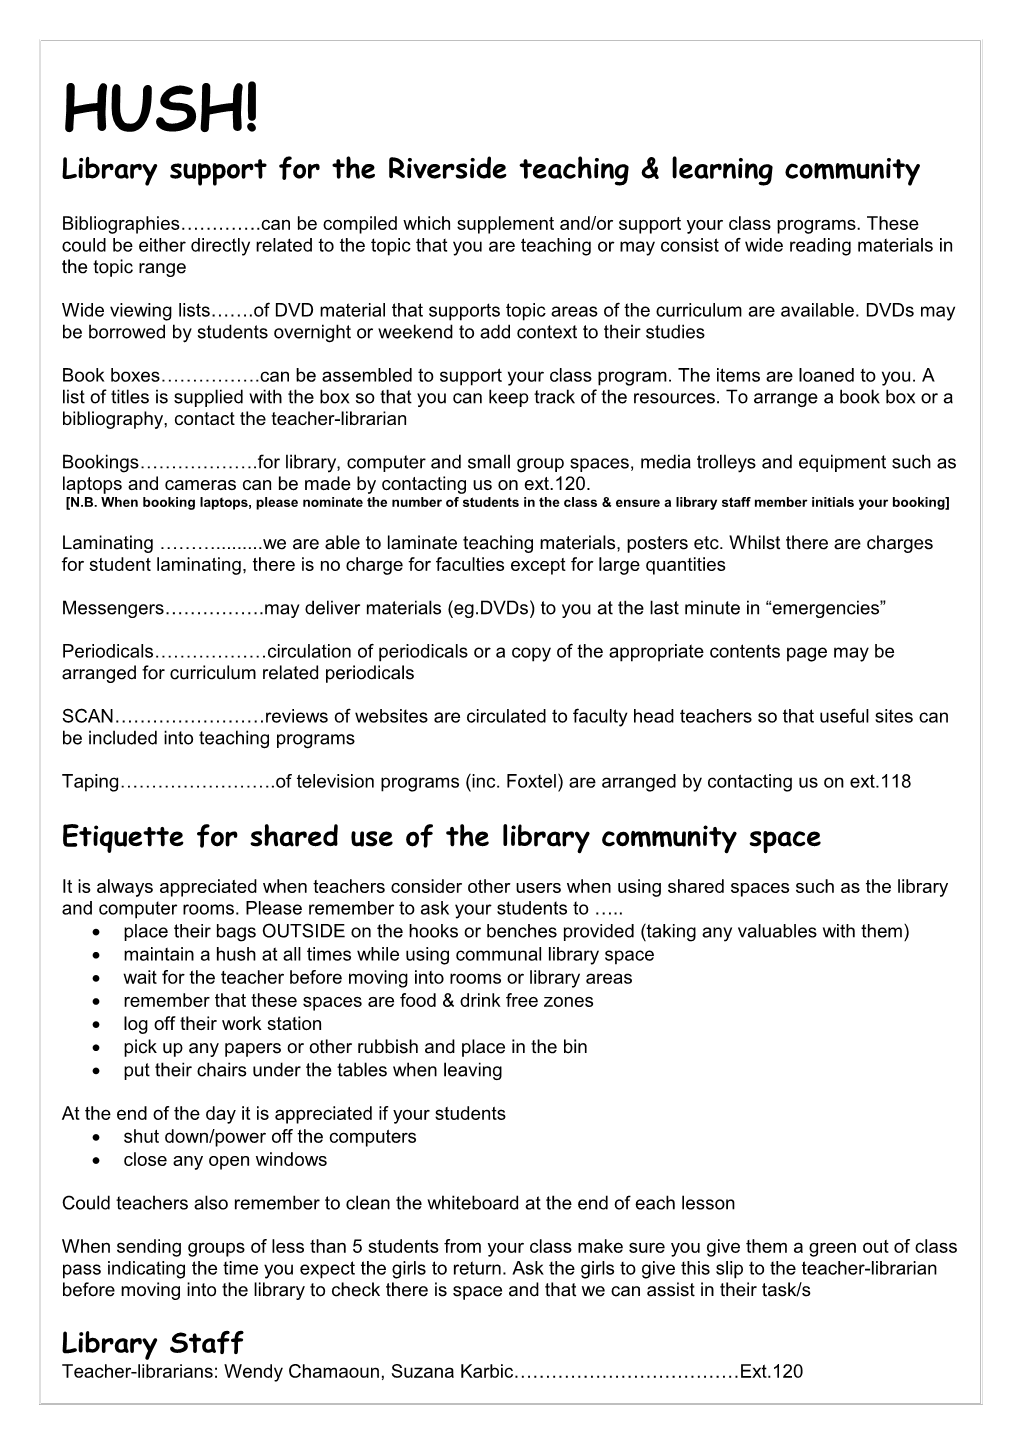 Summary of Library Curriculum Support for Teachers